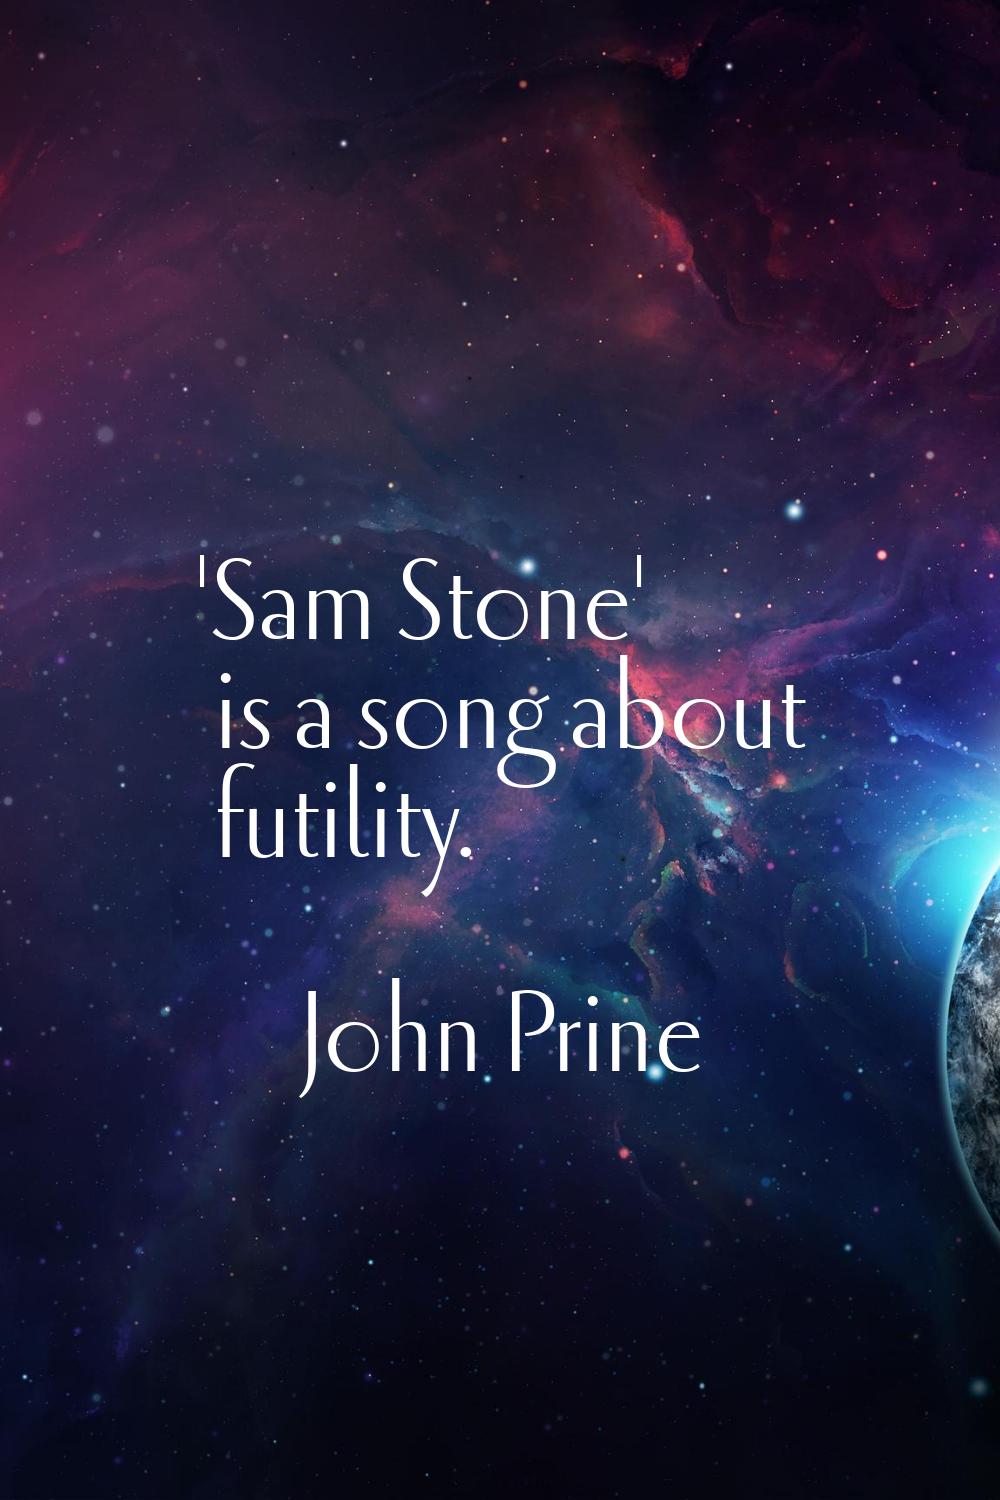 'Sam Stone' is a song about futility.